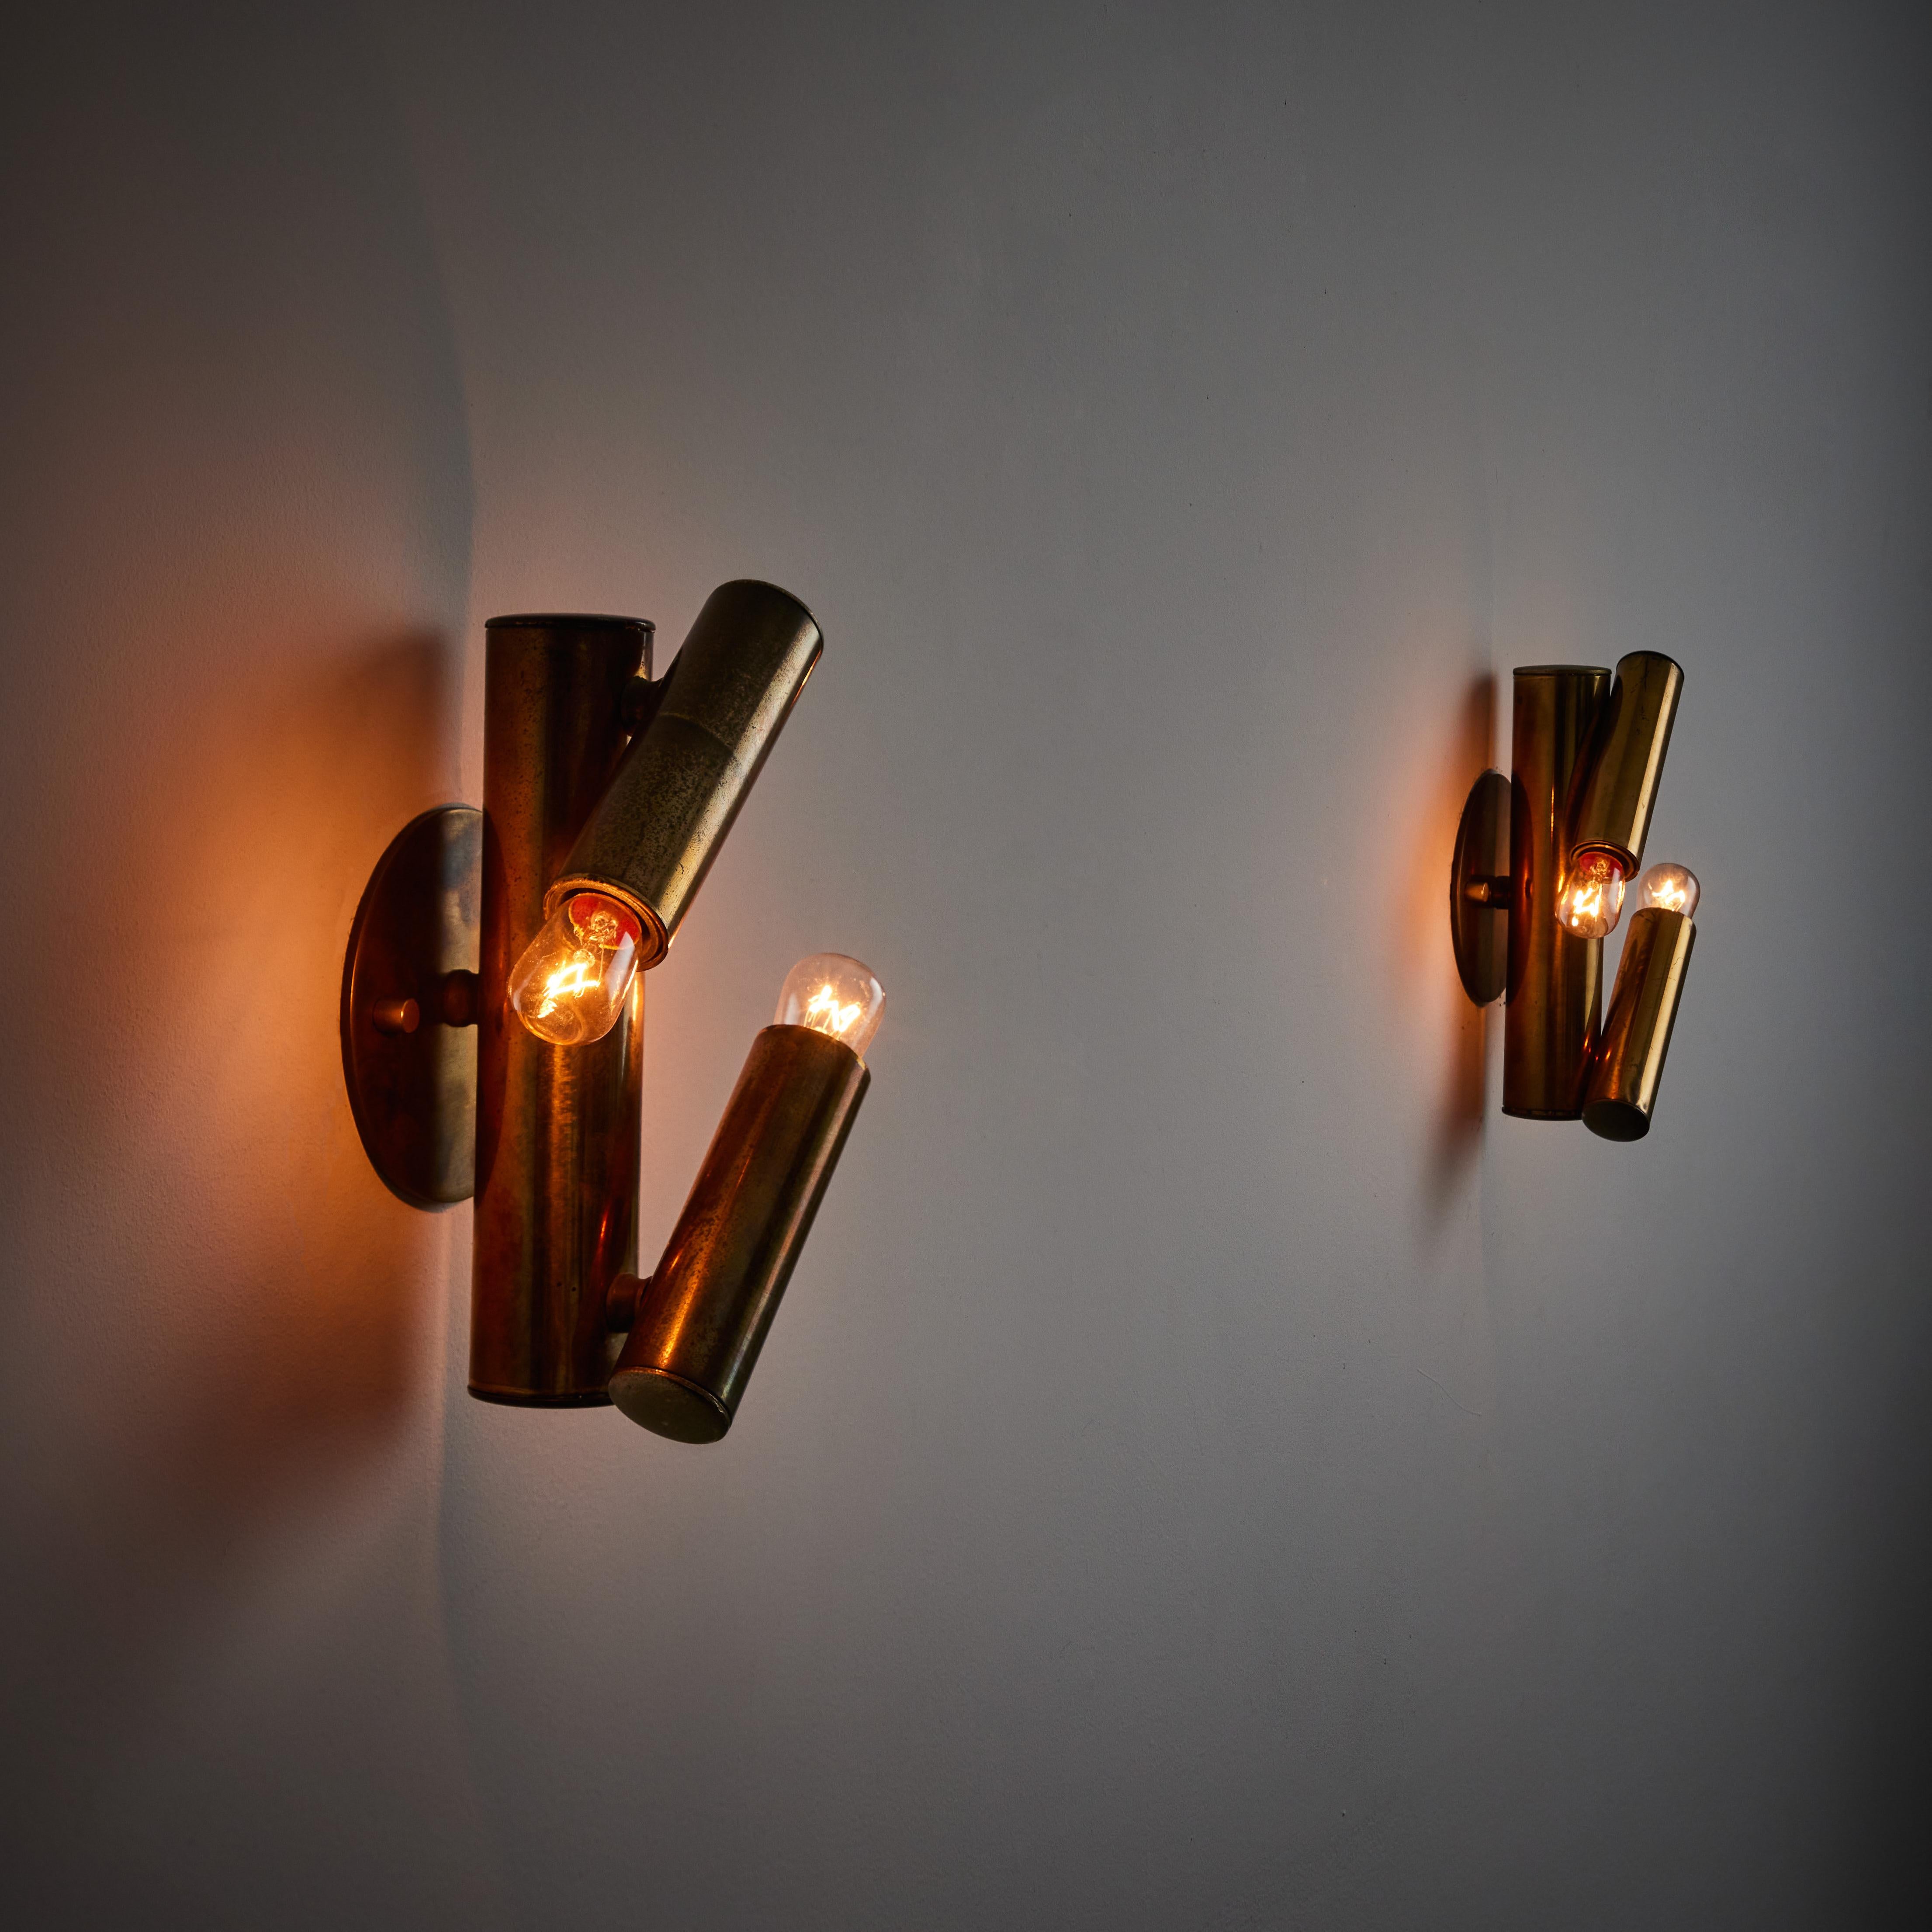 Pair of sconces by Gaetano Sciolari. Manufactured in Italy, circa 1950s. A trio of all brass pipes make up these elegant and minimal scones. Aged brass is at full show throughout this pair. Each light holds two E14 sockets, adapted for the US. We